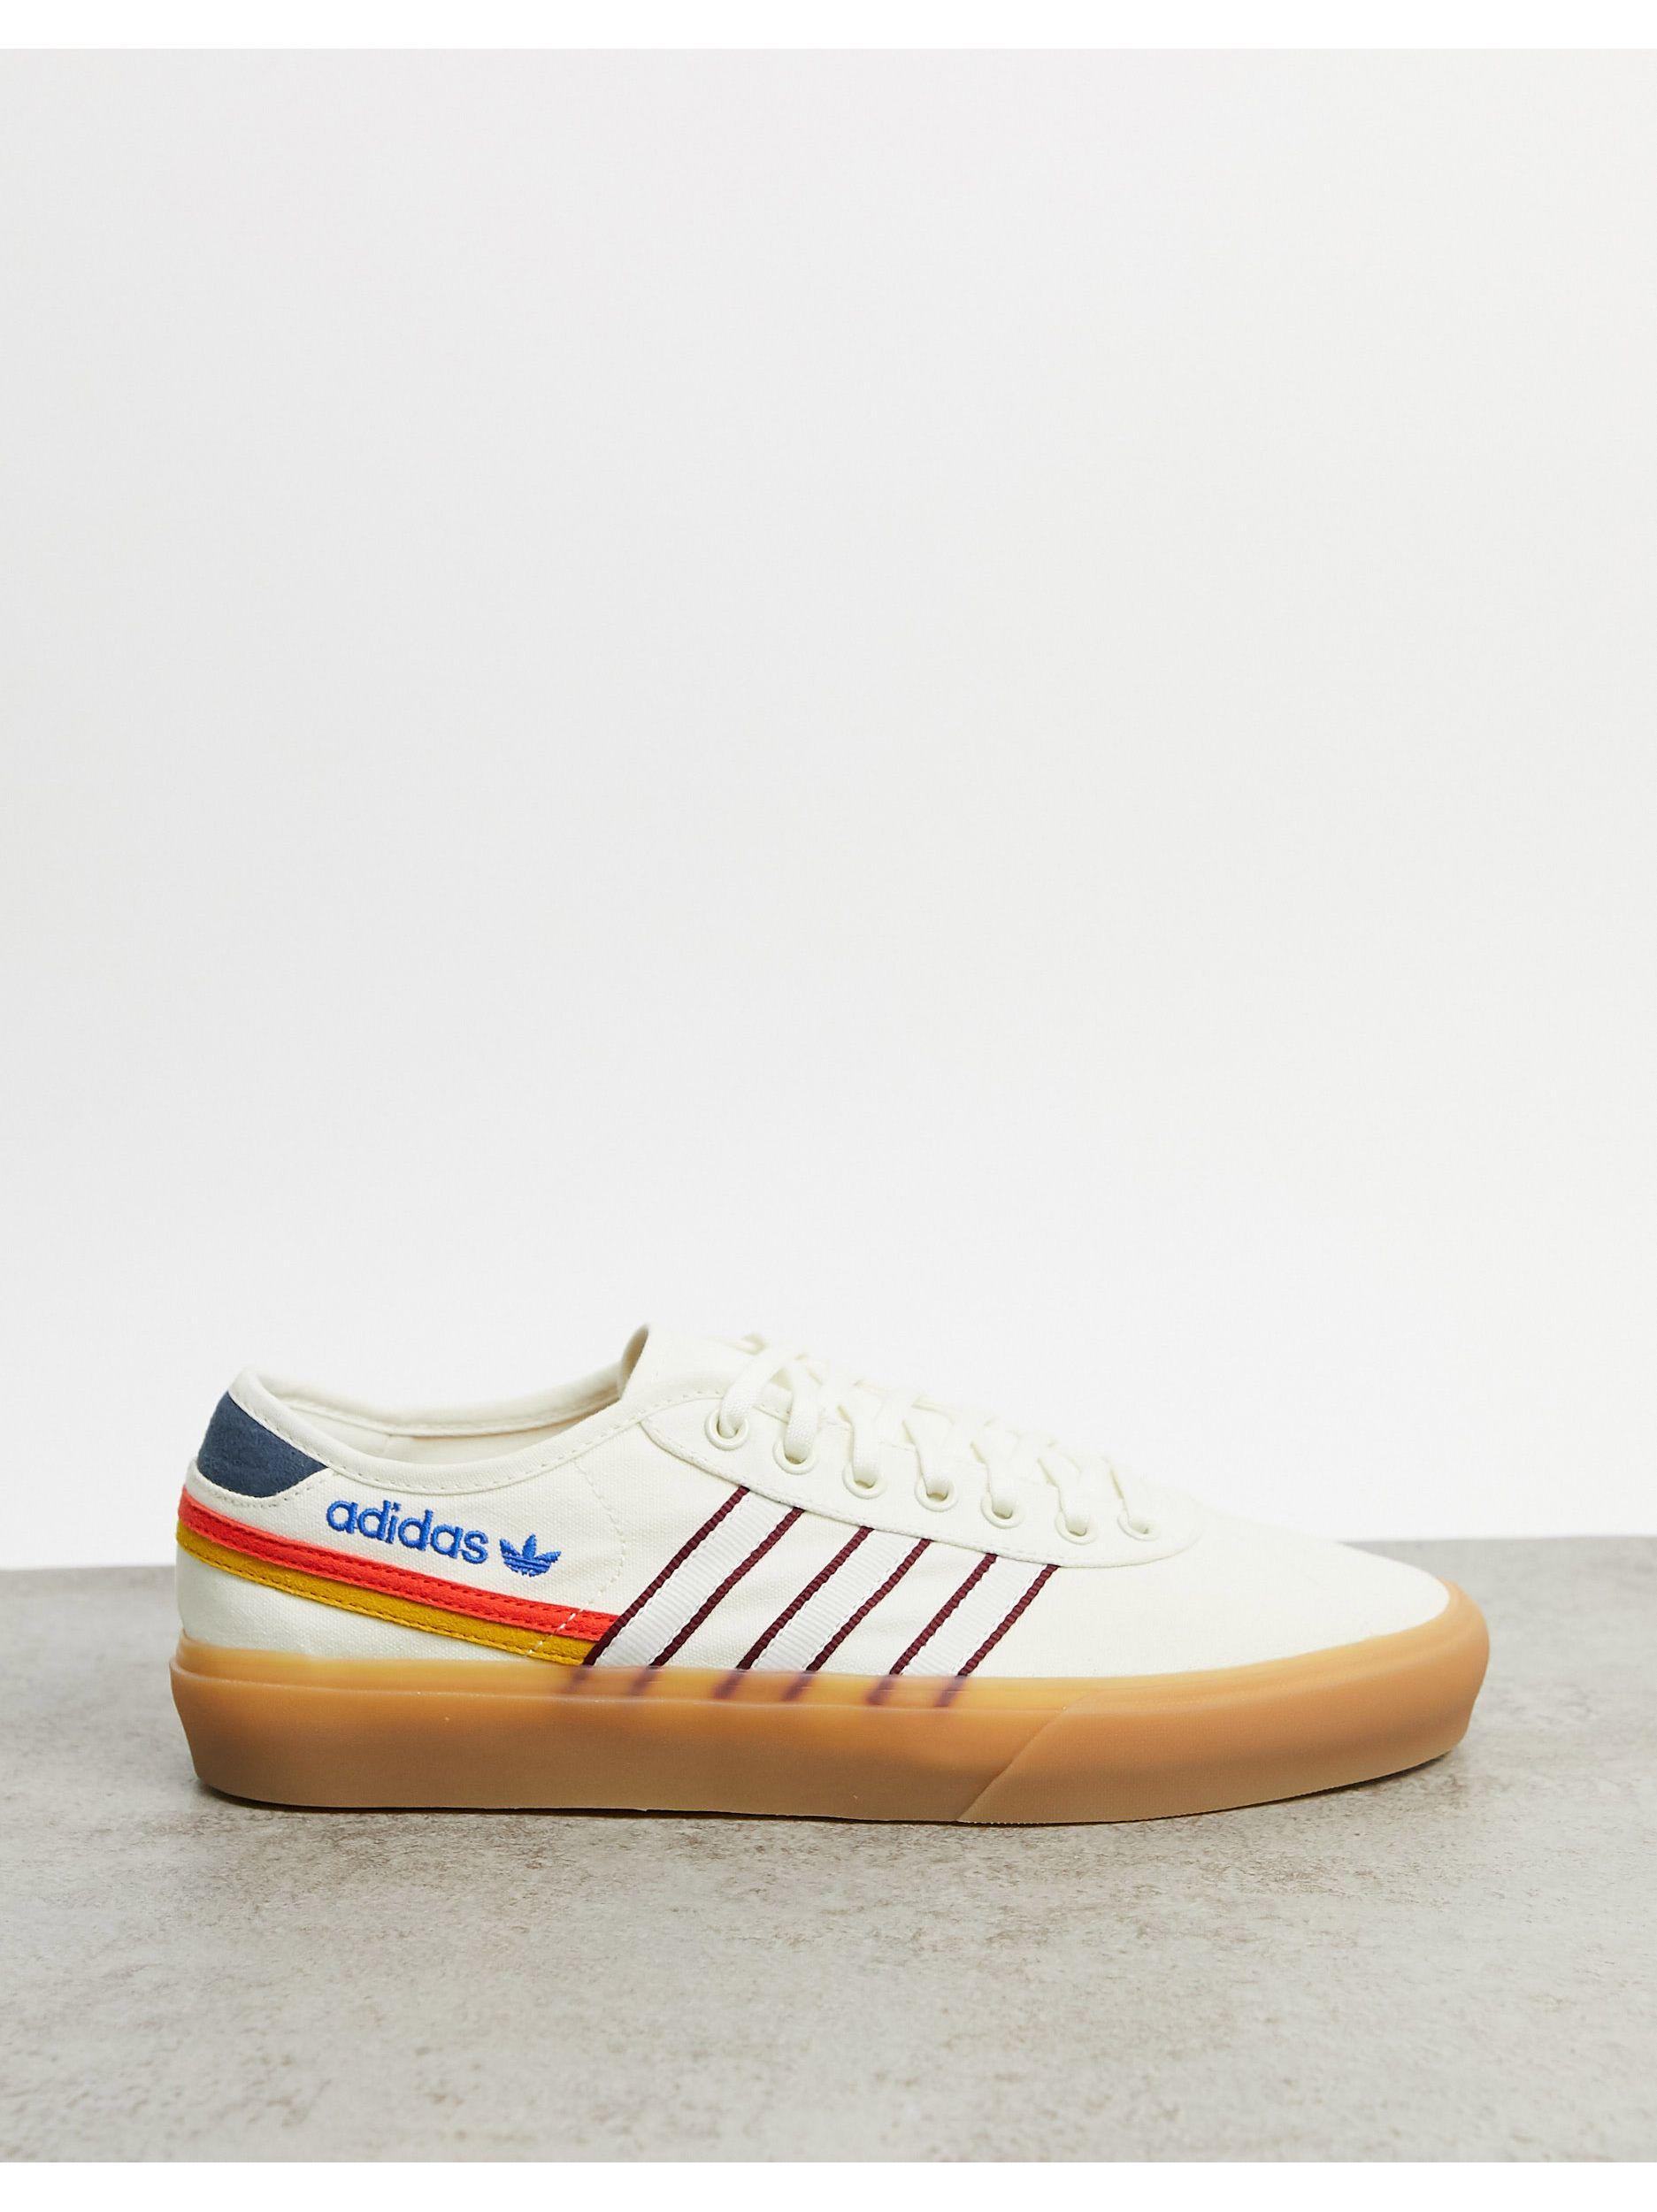 adidas Originals Delpala Happy Camping Sneakers in White for Men | Lyst